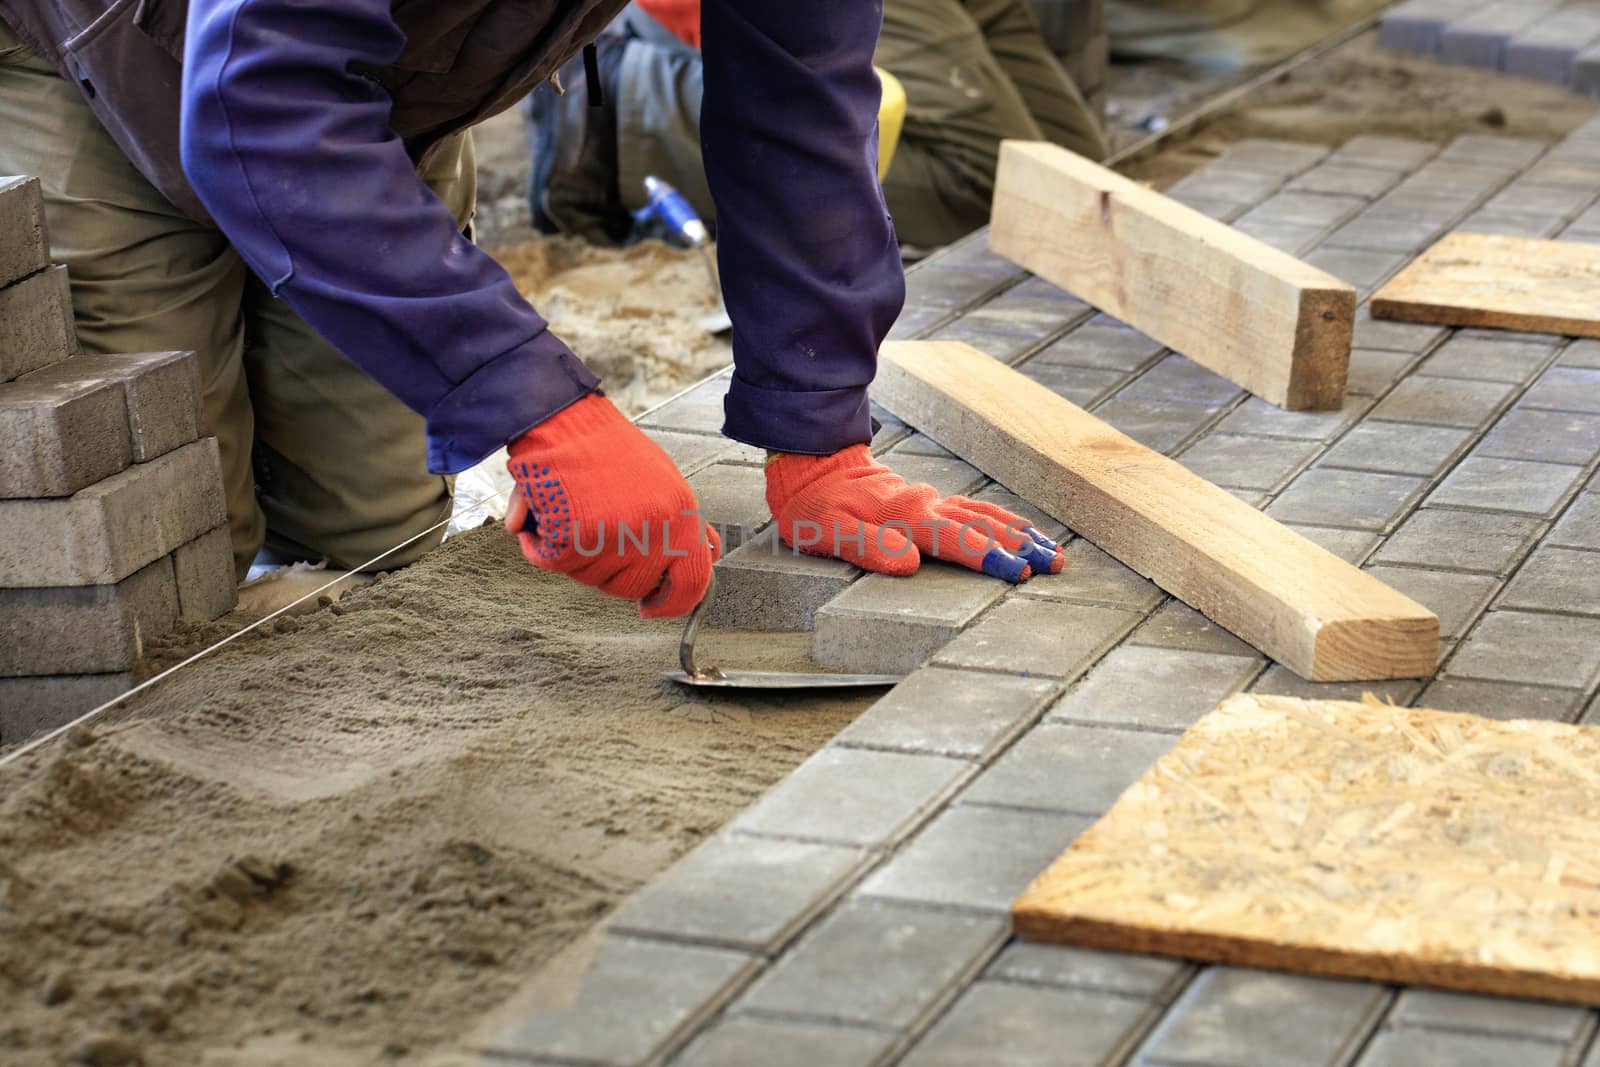 The worker levels the platform for laying paving slabs with the help of a trowel and wooden bars, aligning it to the level of the tensioned thread.